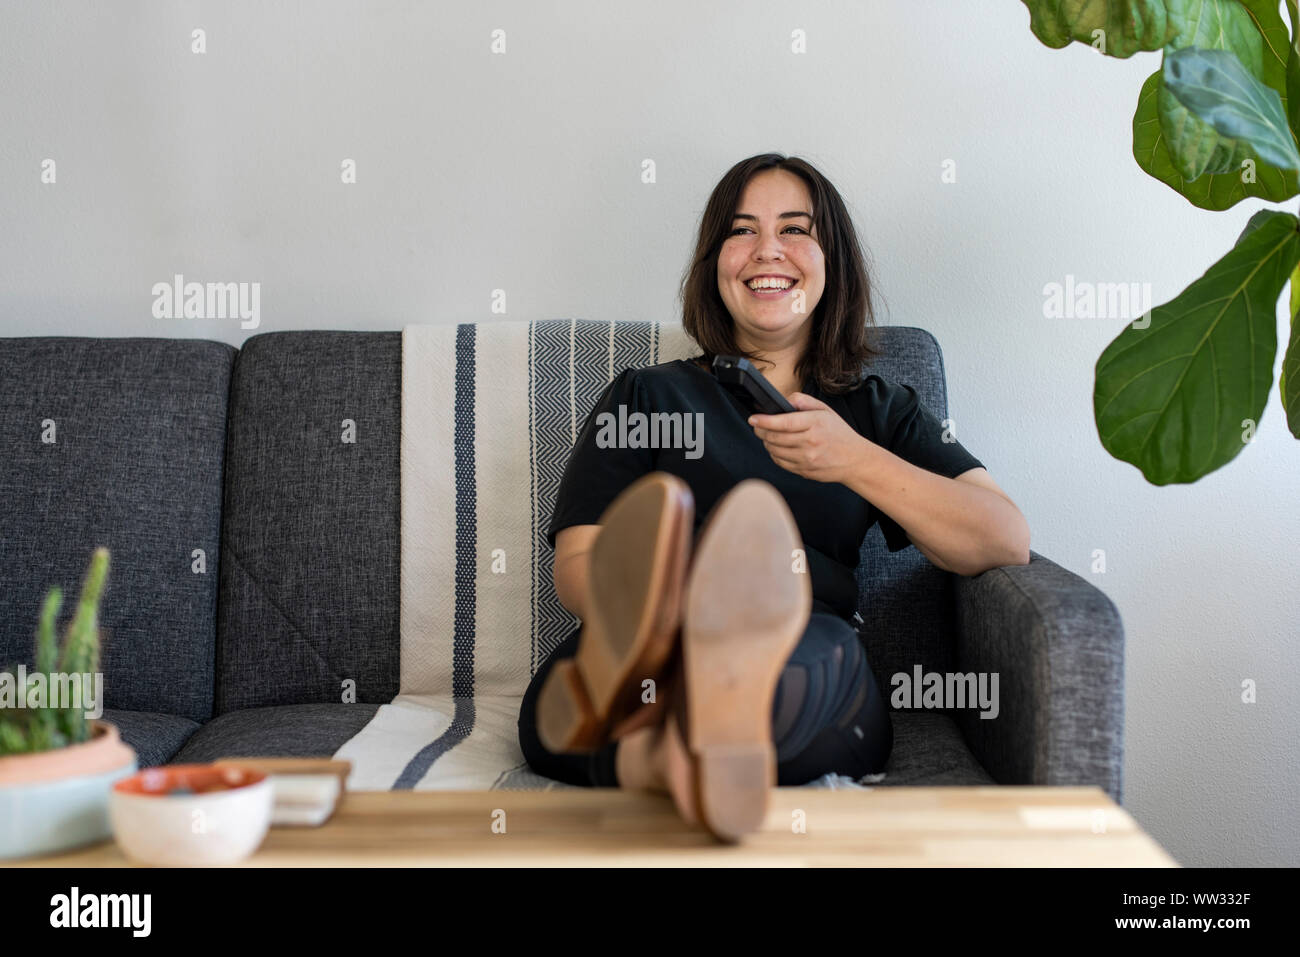 Woman sitting on couch holding remote control Stock Photo